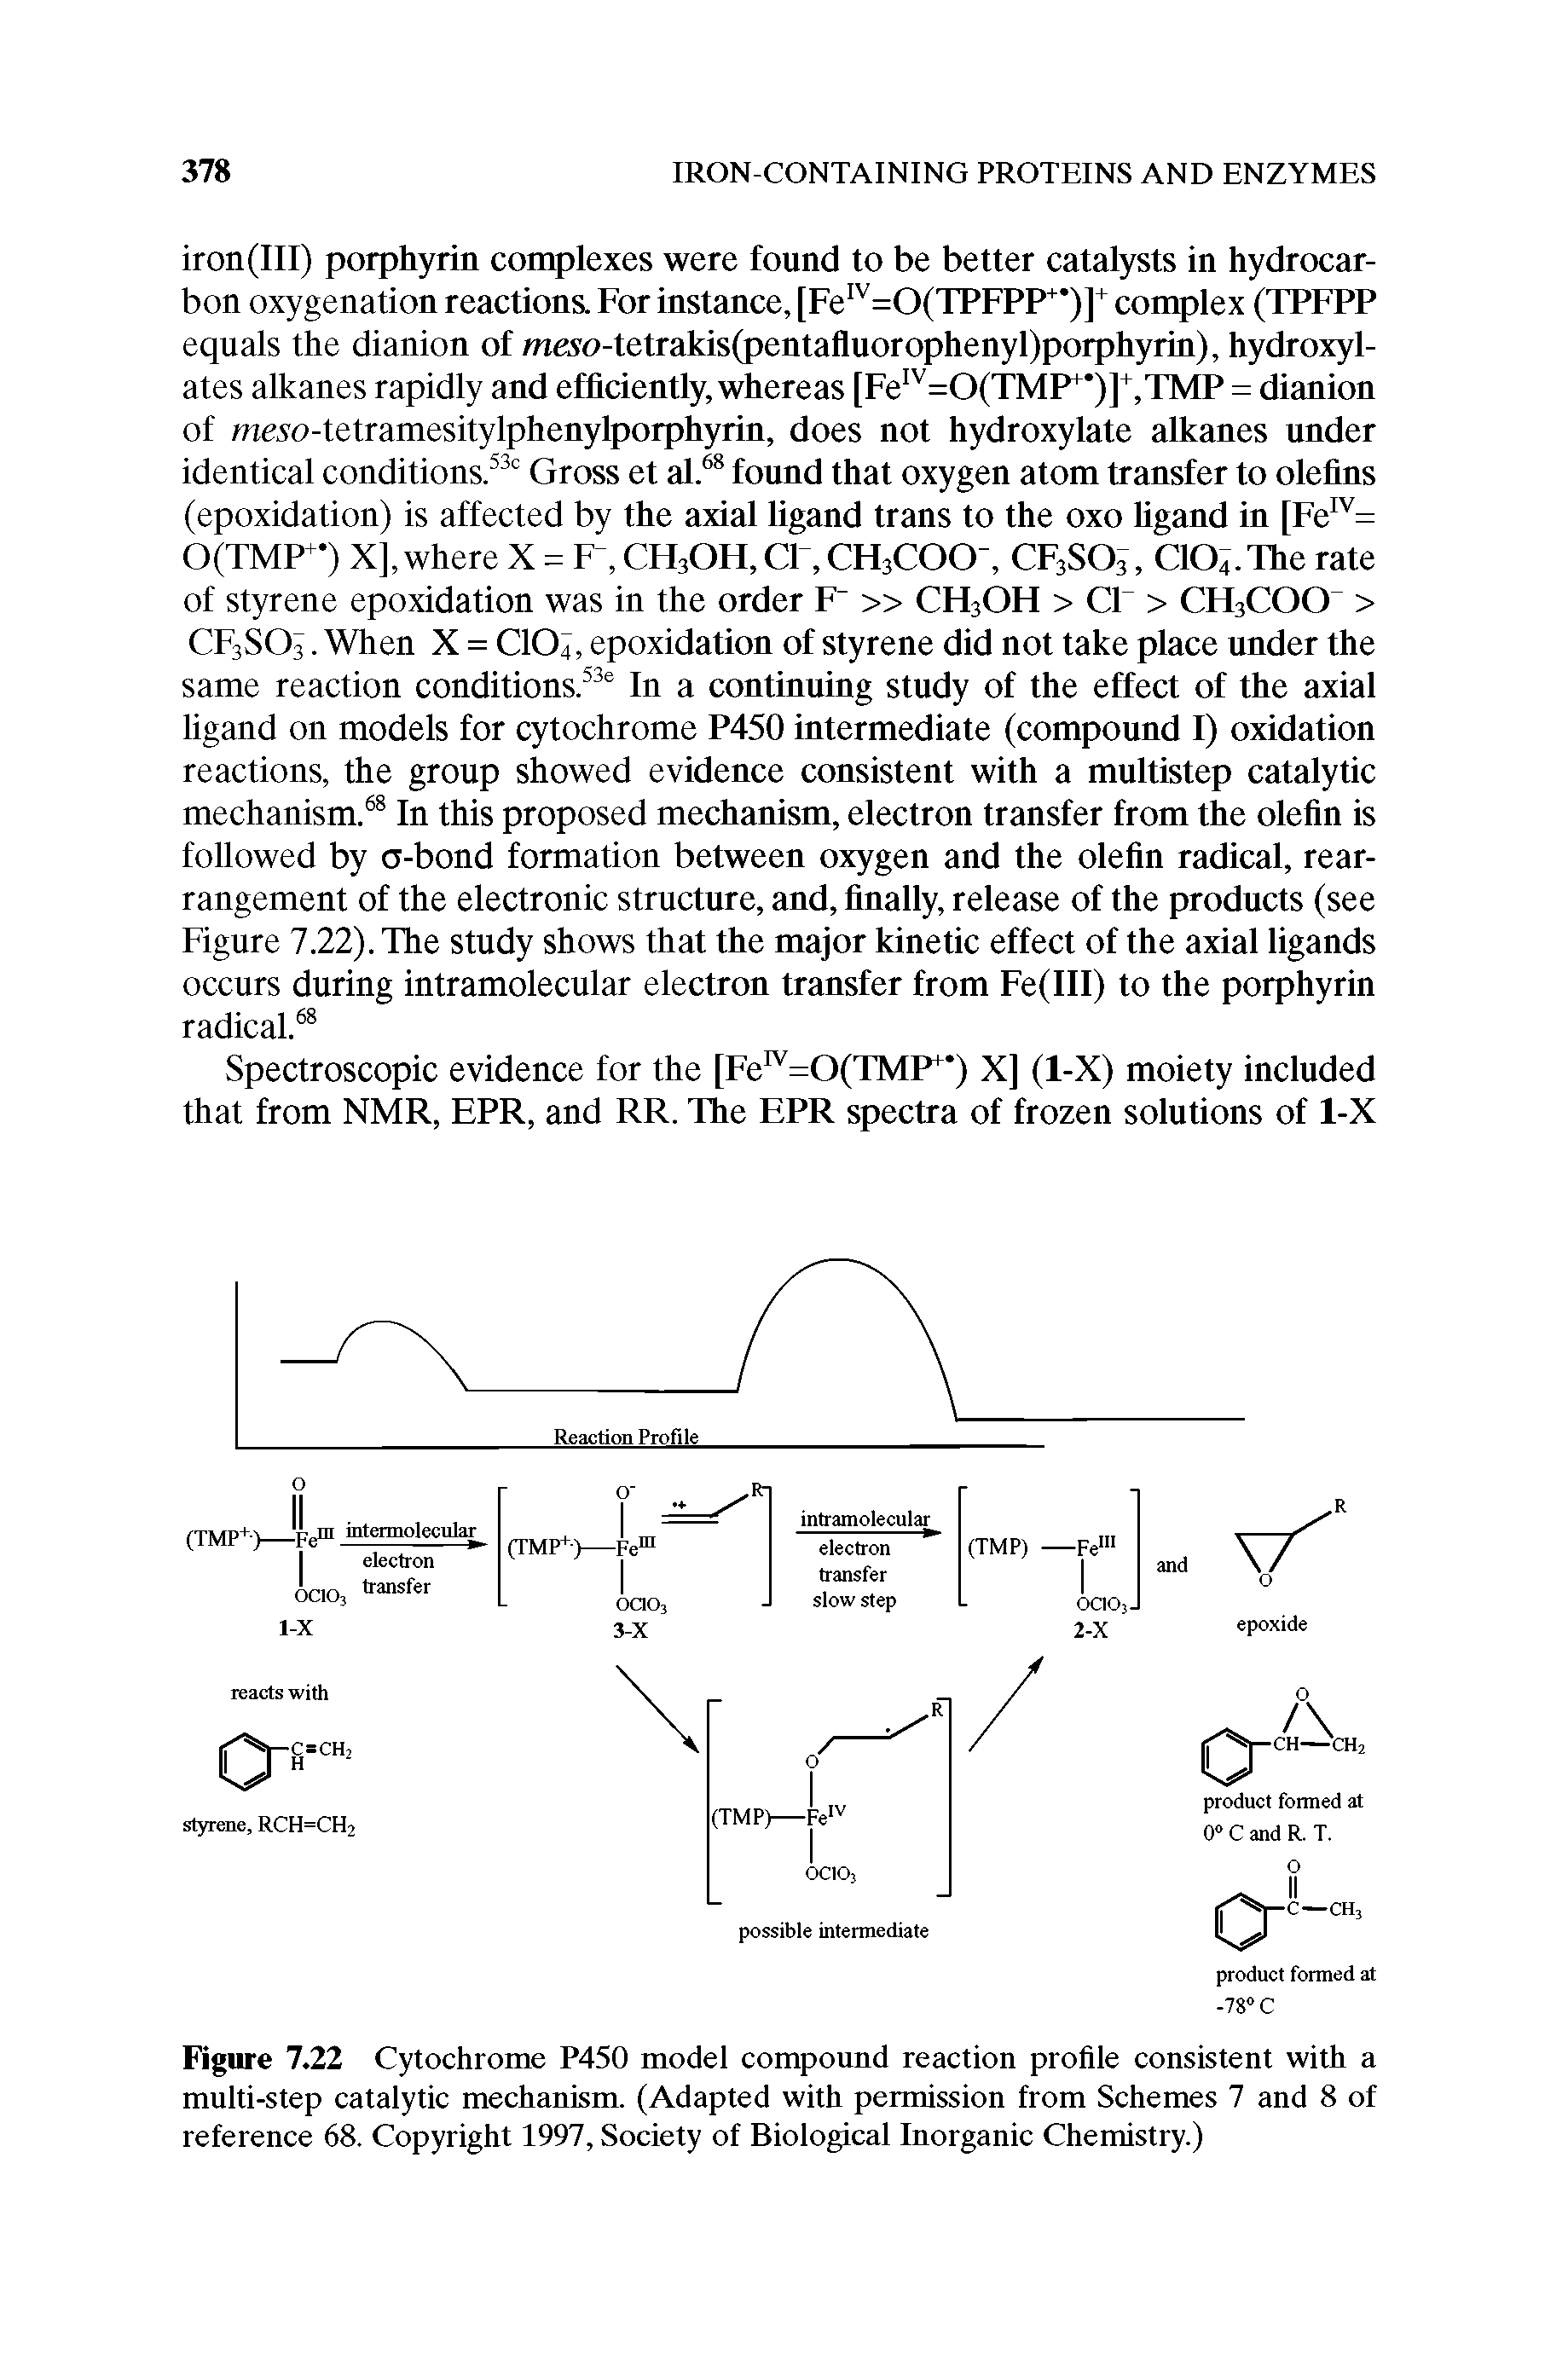 Figure 7.22 Cytochrome P450 model compound reaction profile consistent with a multi-step catalytic mechanism. (Adapted with permission from Schemes 7 and 8 of reference 68. Copyright 1997, Society of Biological Inorganic Chemistry.)...